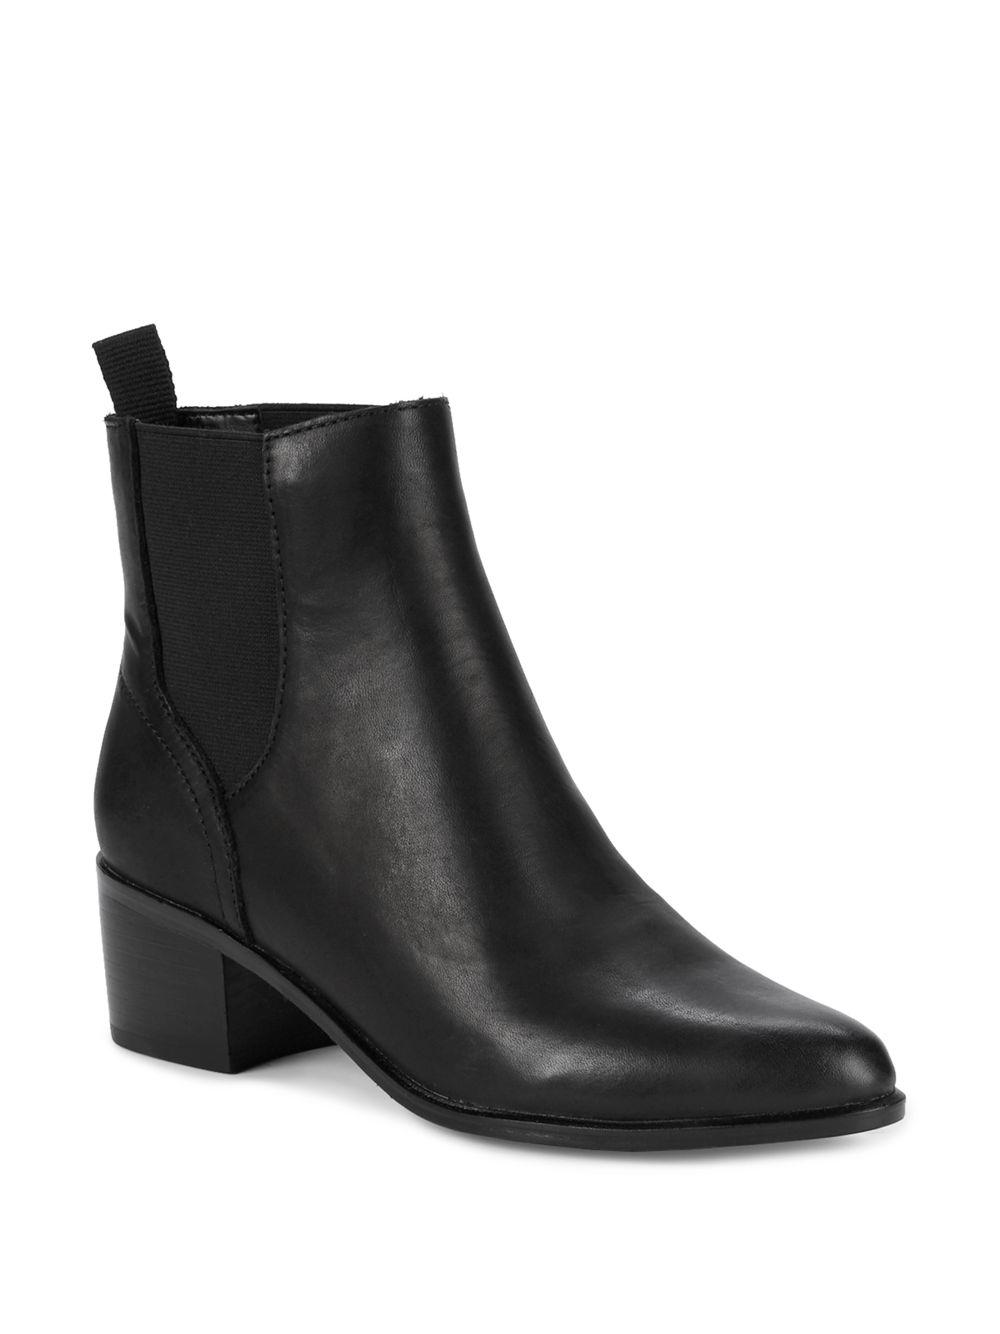 dolce vita corie leather bootie